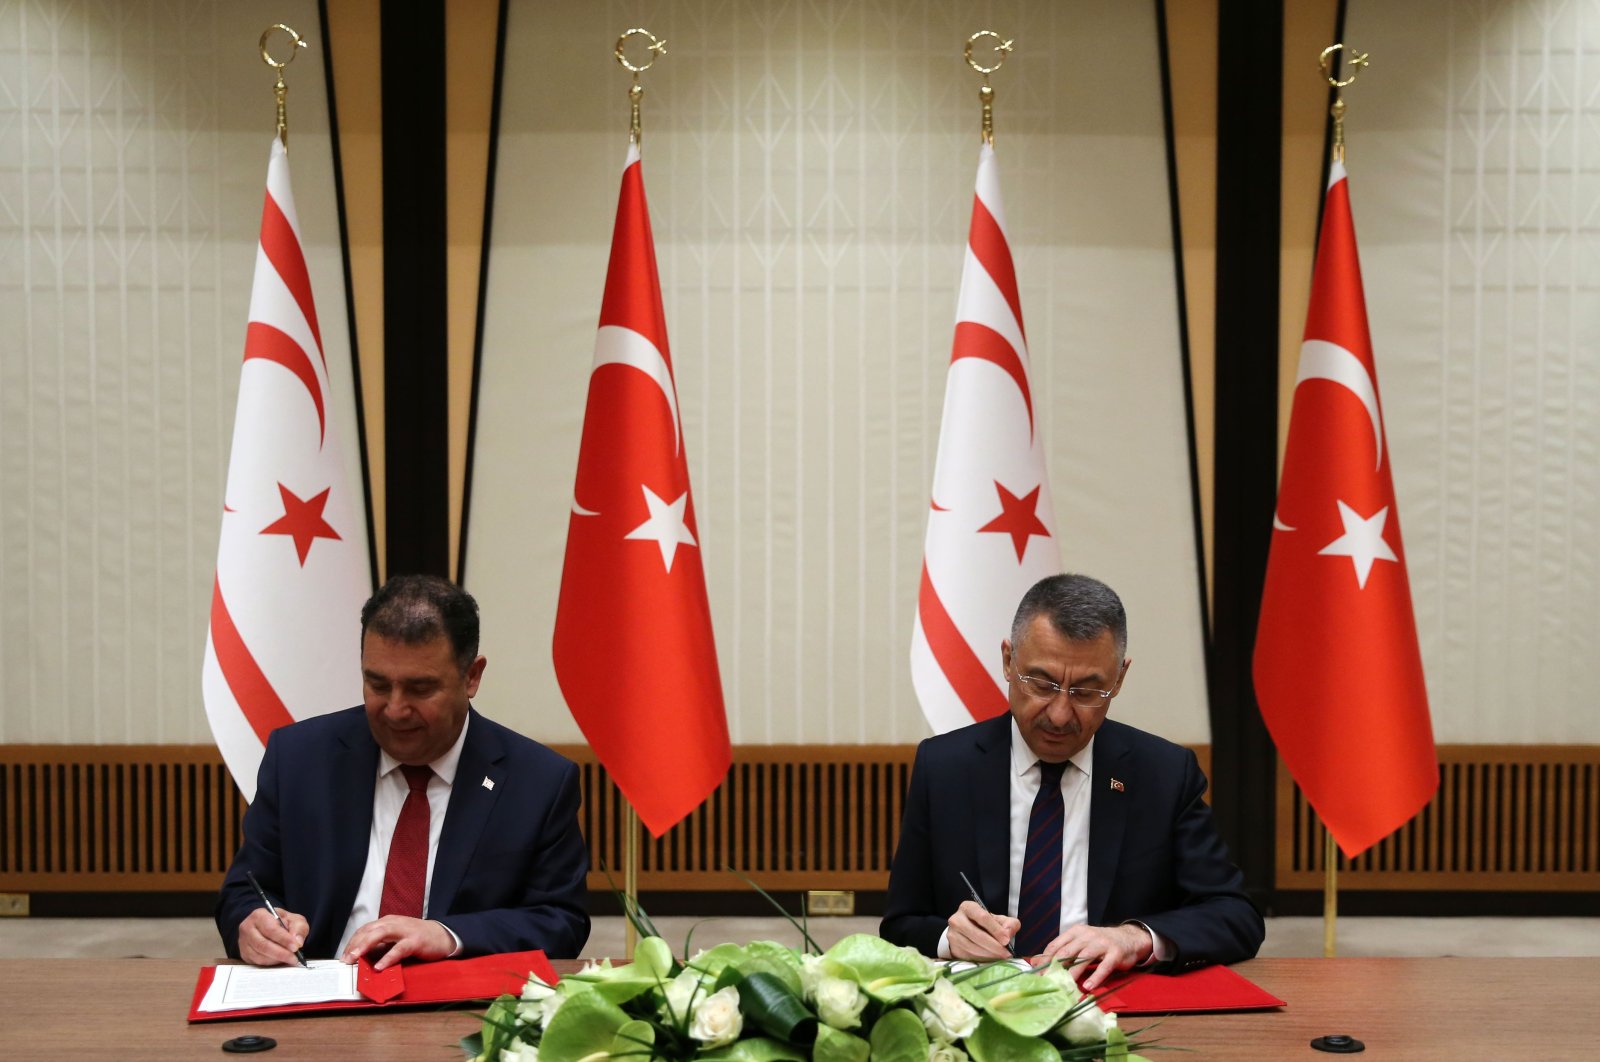 Turkish Republic of Northern Cyprus (TRNC) Prime Minister Ersan Saner (L) and Turkish Vice President Fuat Oktay sign the Turkey-TRNC 2021 Economic and Monetary Cooperation Agreement, Ankara, Turkey, March 4, 2021. (AA Photo)